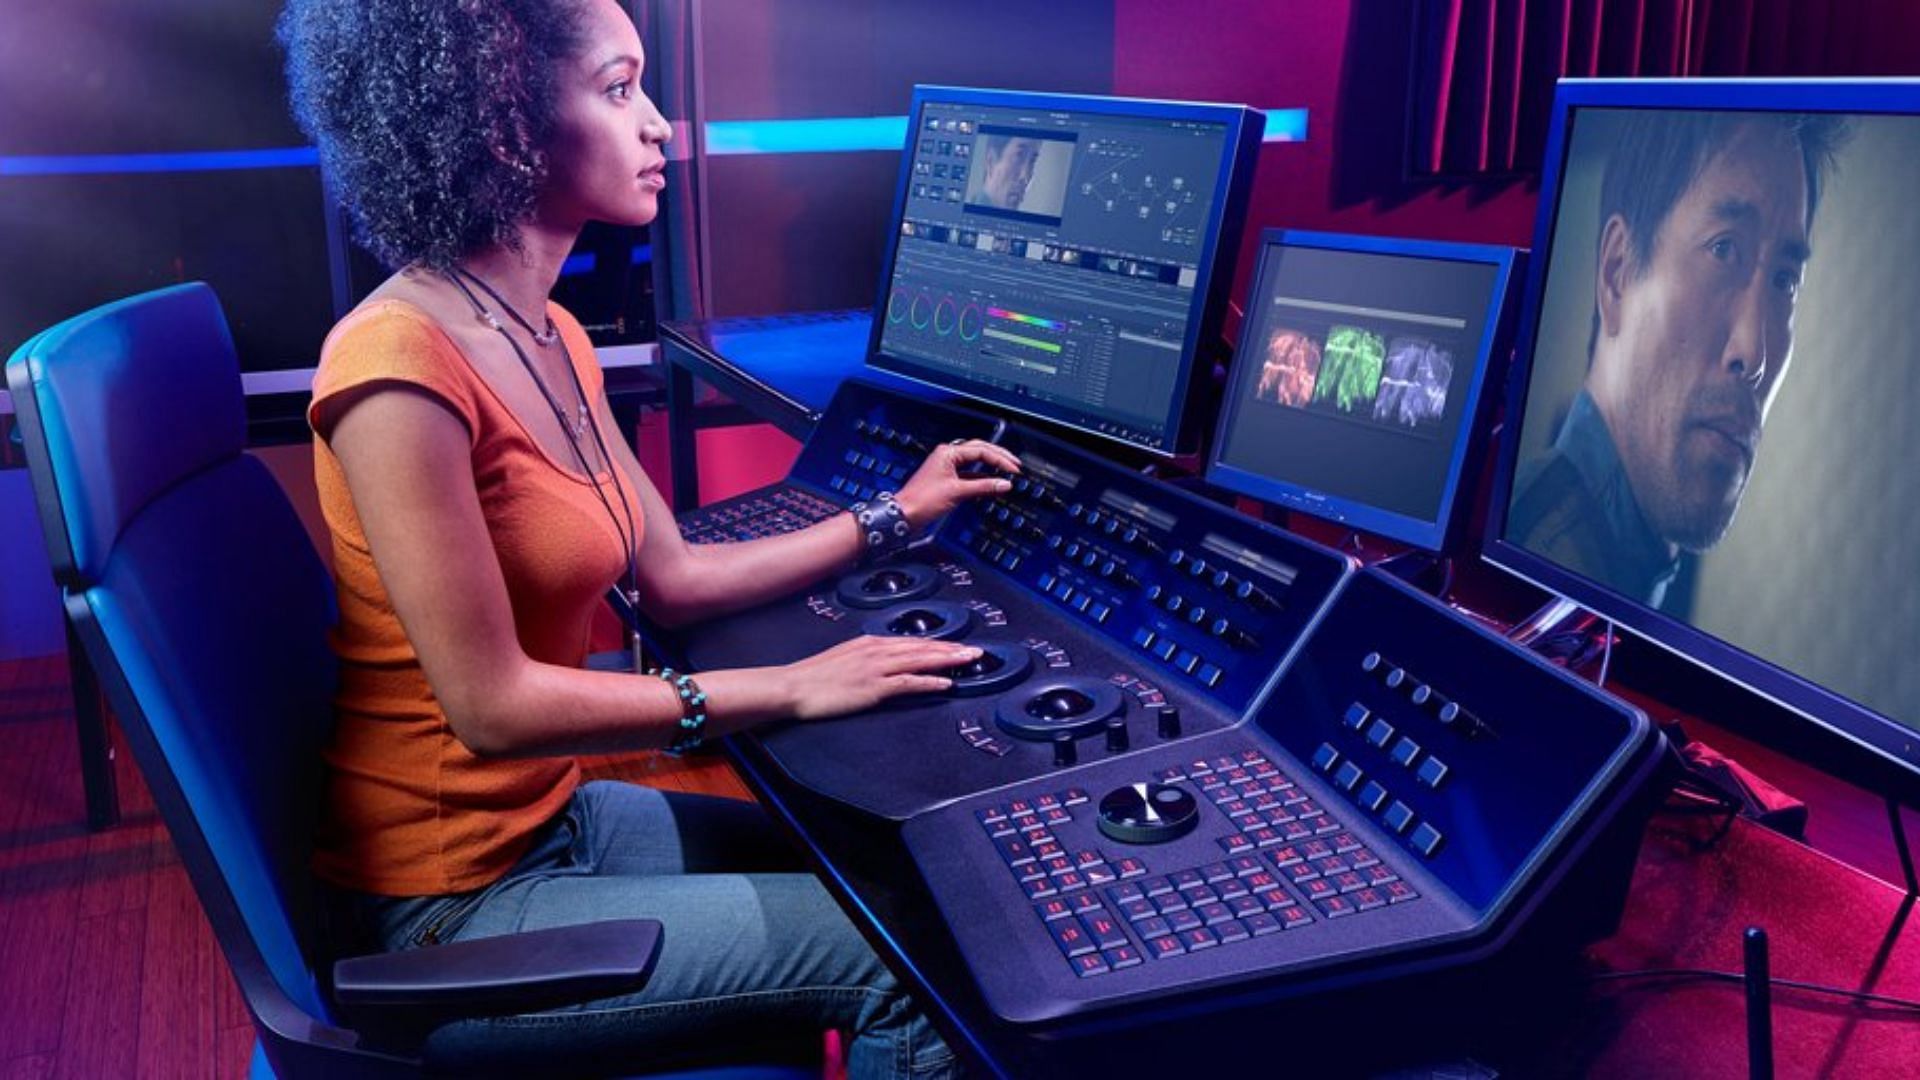 Video editing software are at the core of an engaging YouTube video (Image via Blackmagic Design)